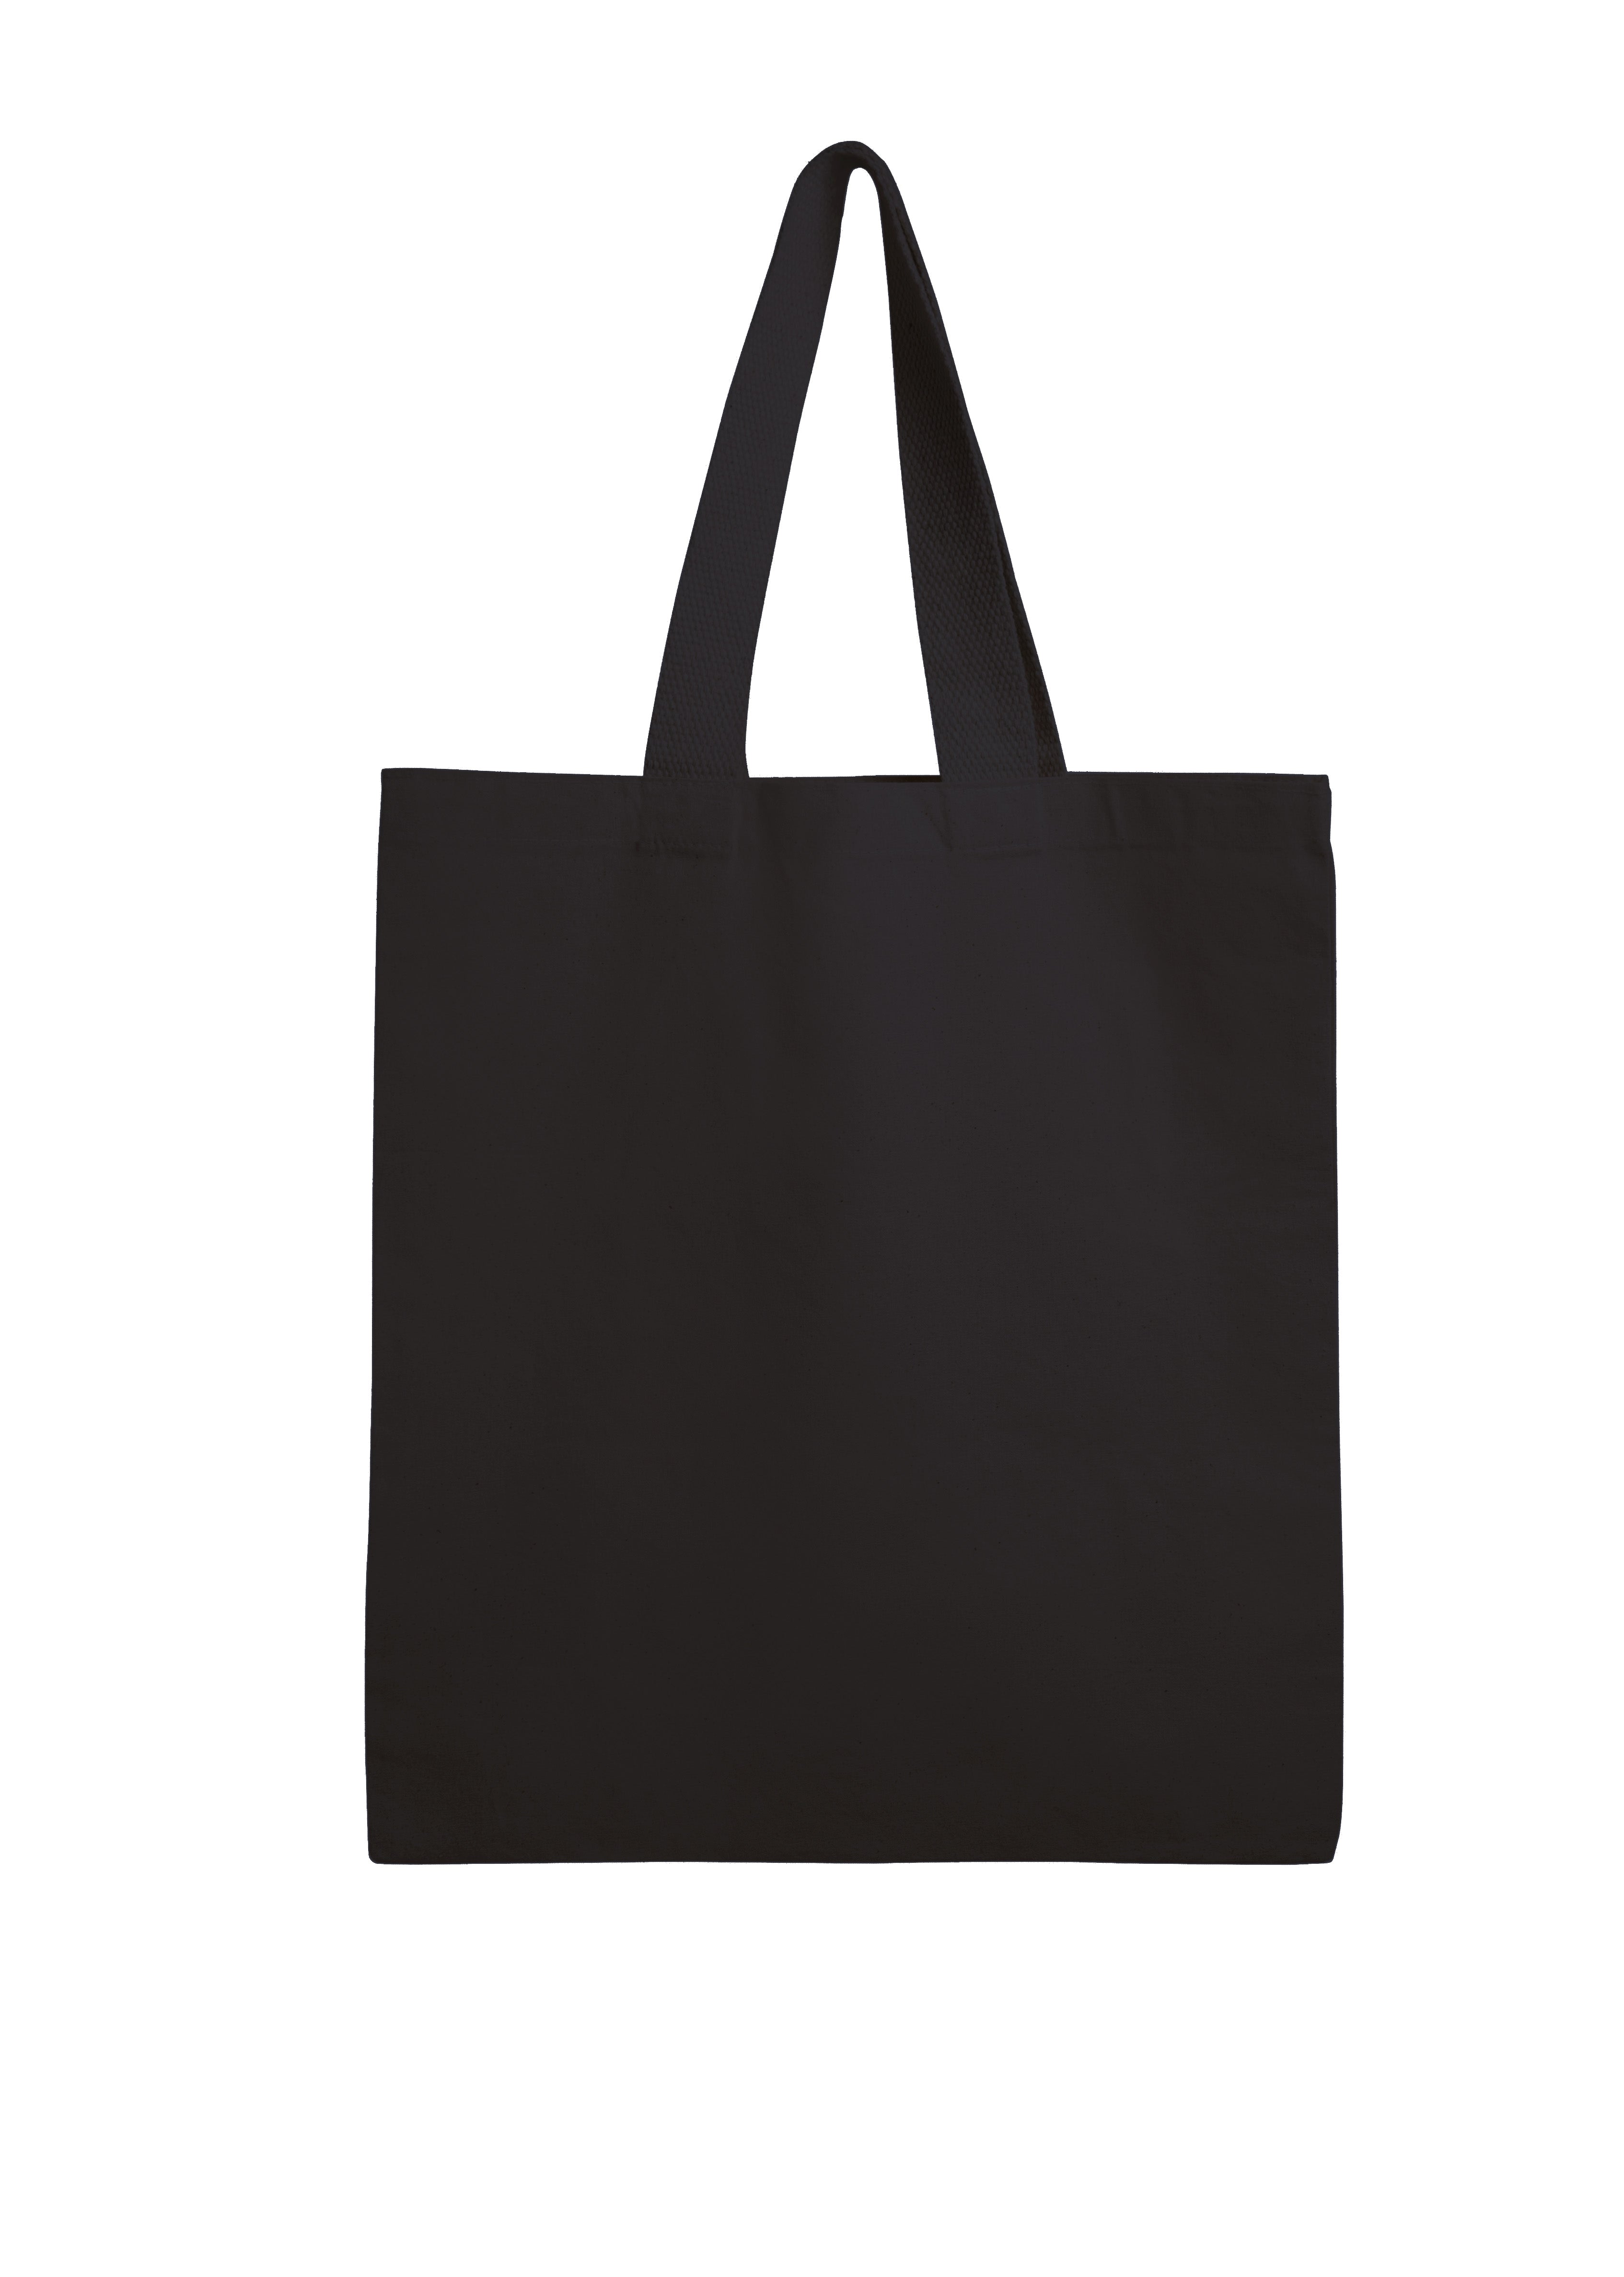 Tote Bags Collection - Stylish and Durable Tote Bags for Women